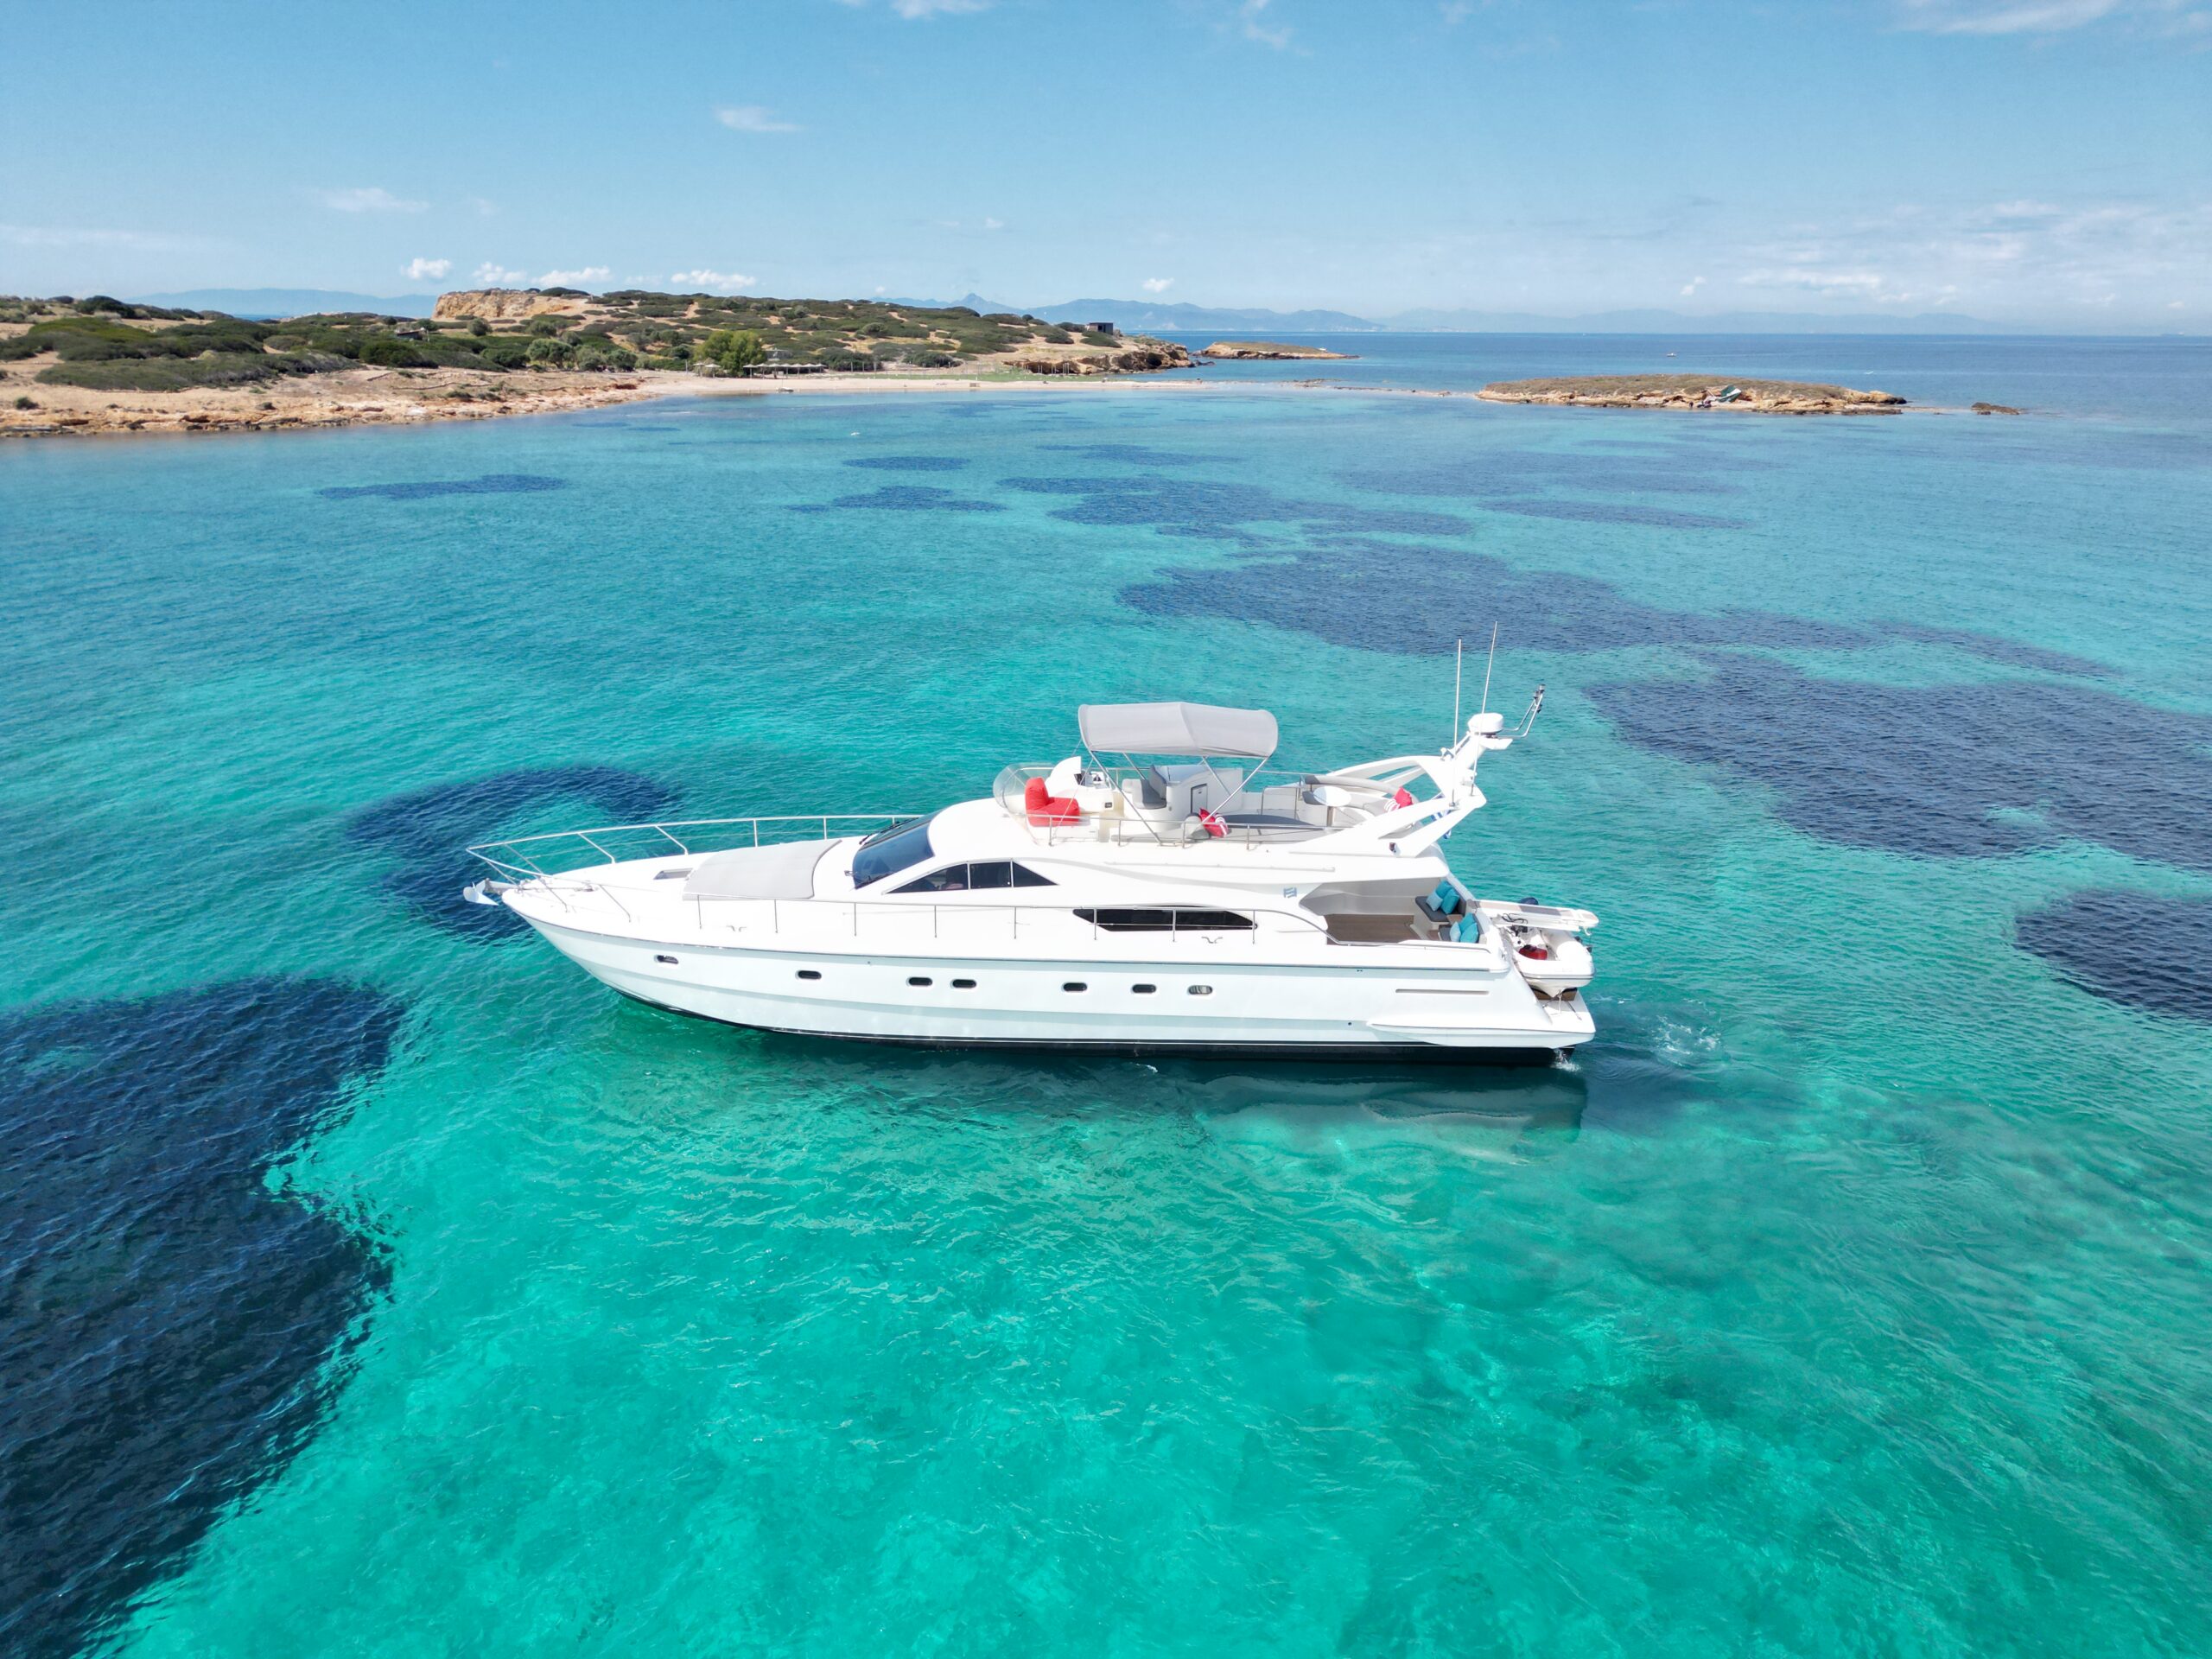 Yacht charter Greece, Rent a Yacht in Greece, Crewed Boat Rentals